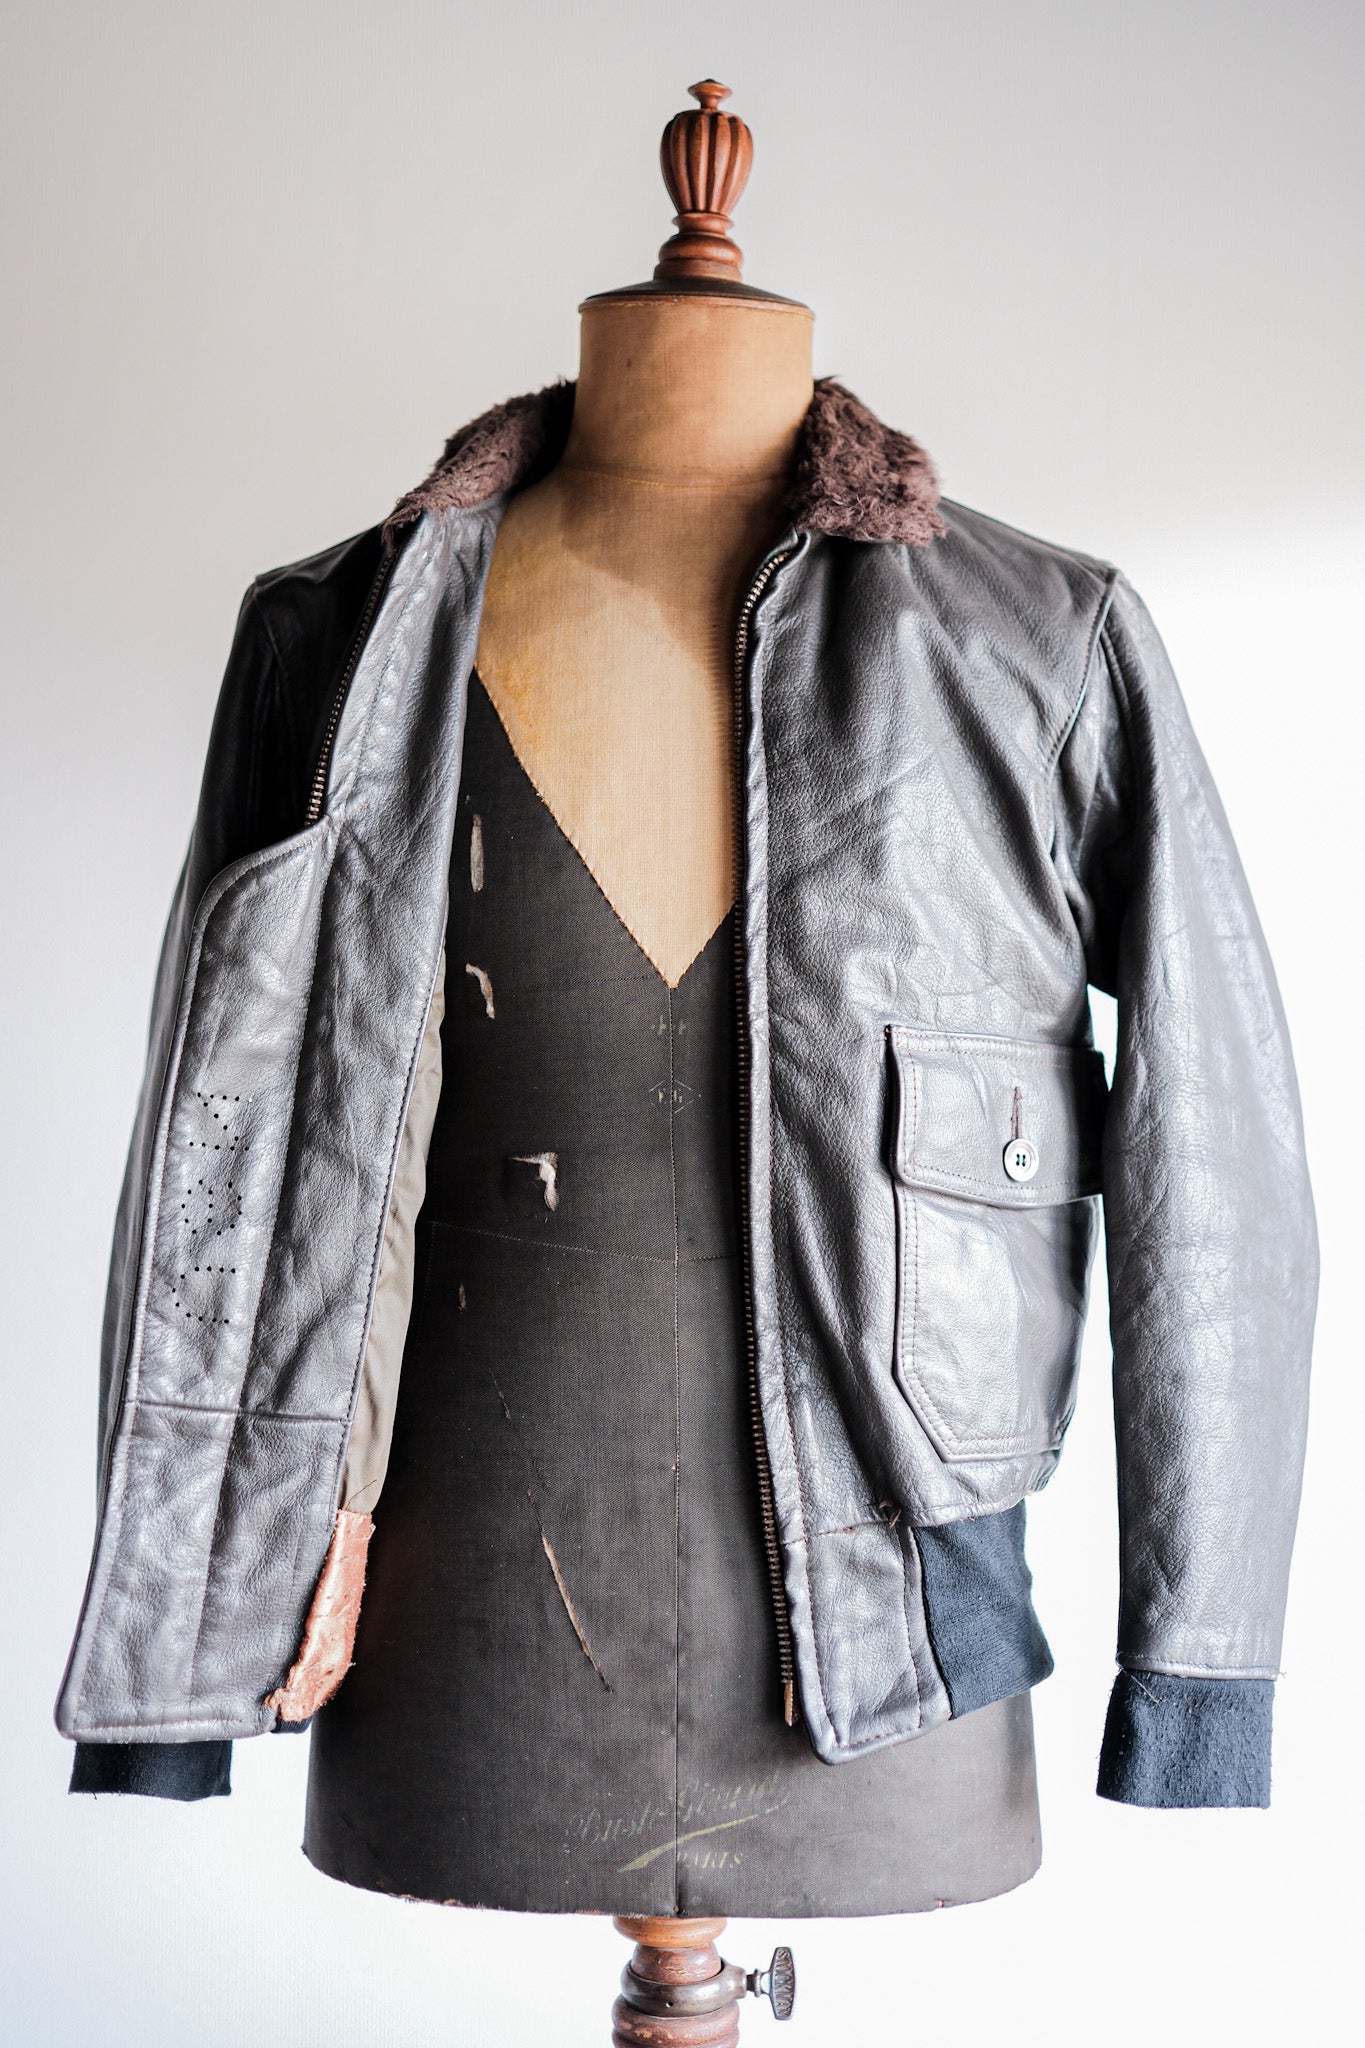 Bomber Jackets: A Brief History - BestLeather.org